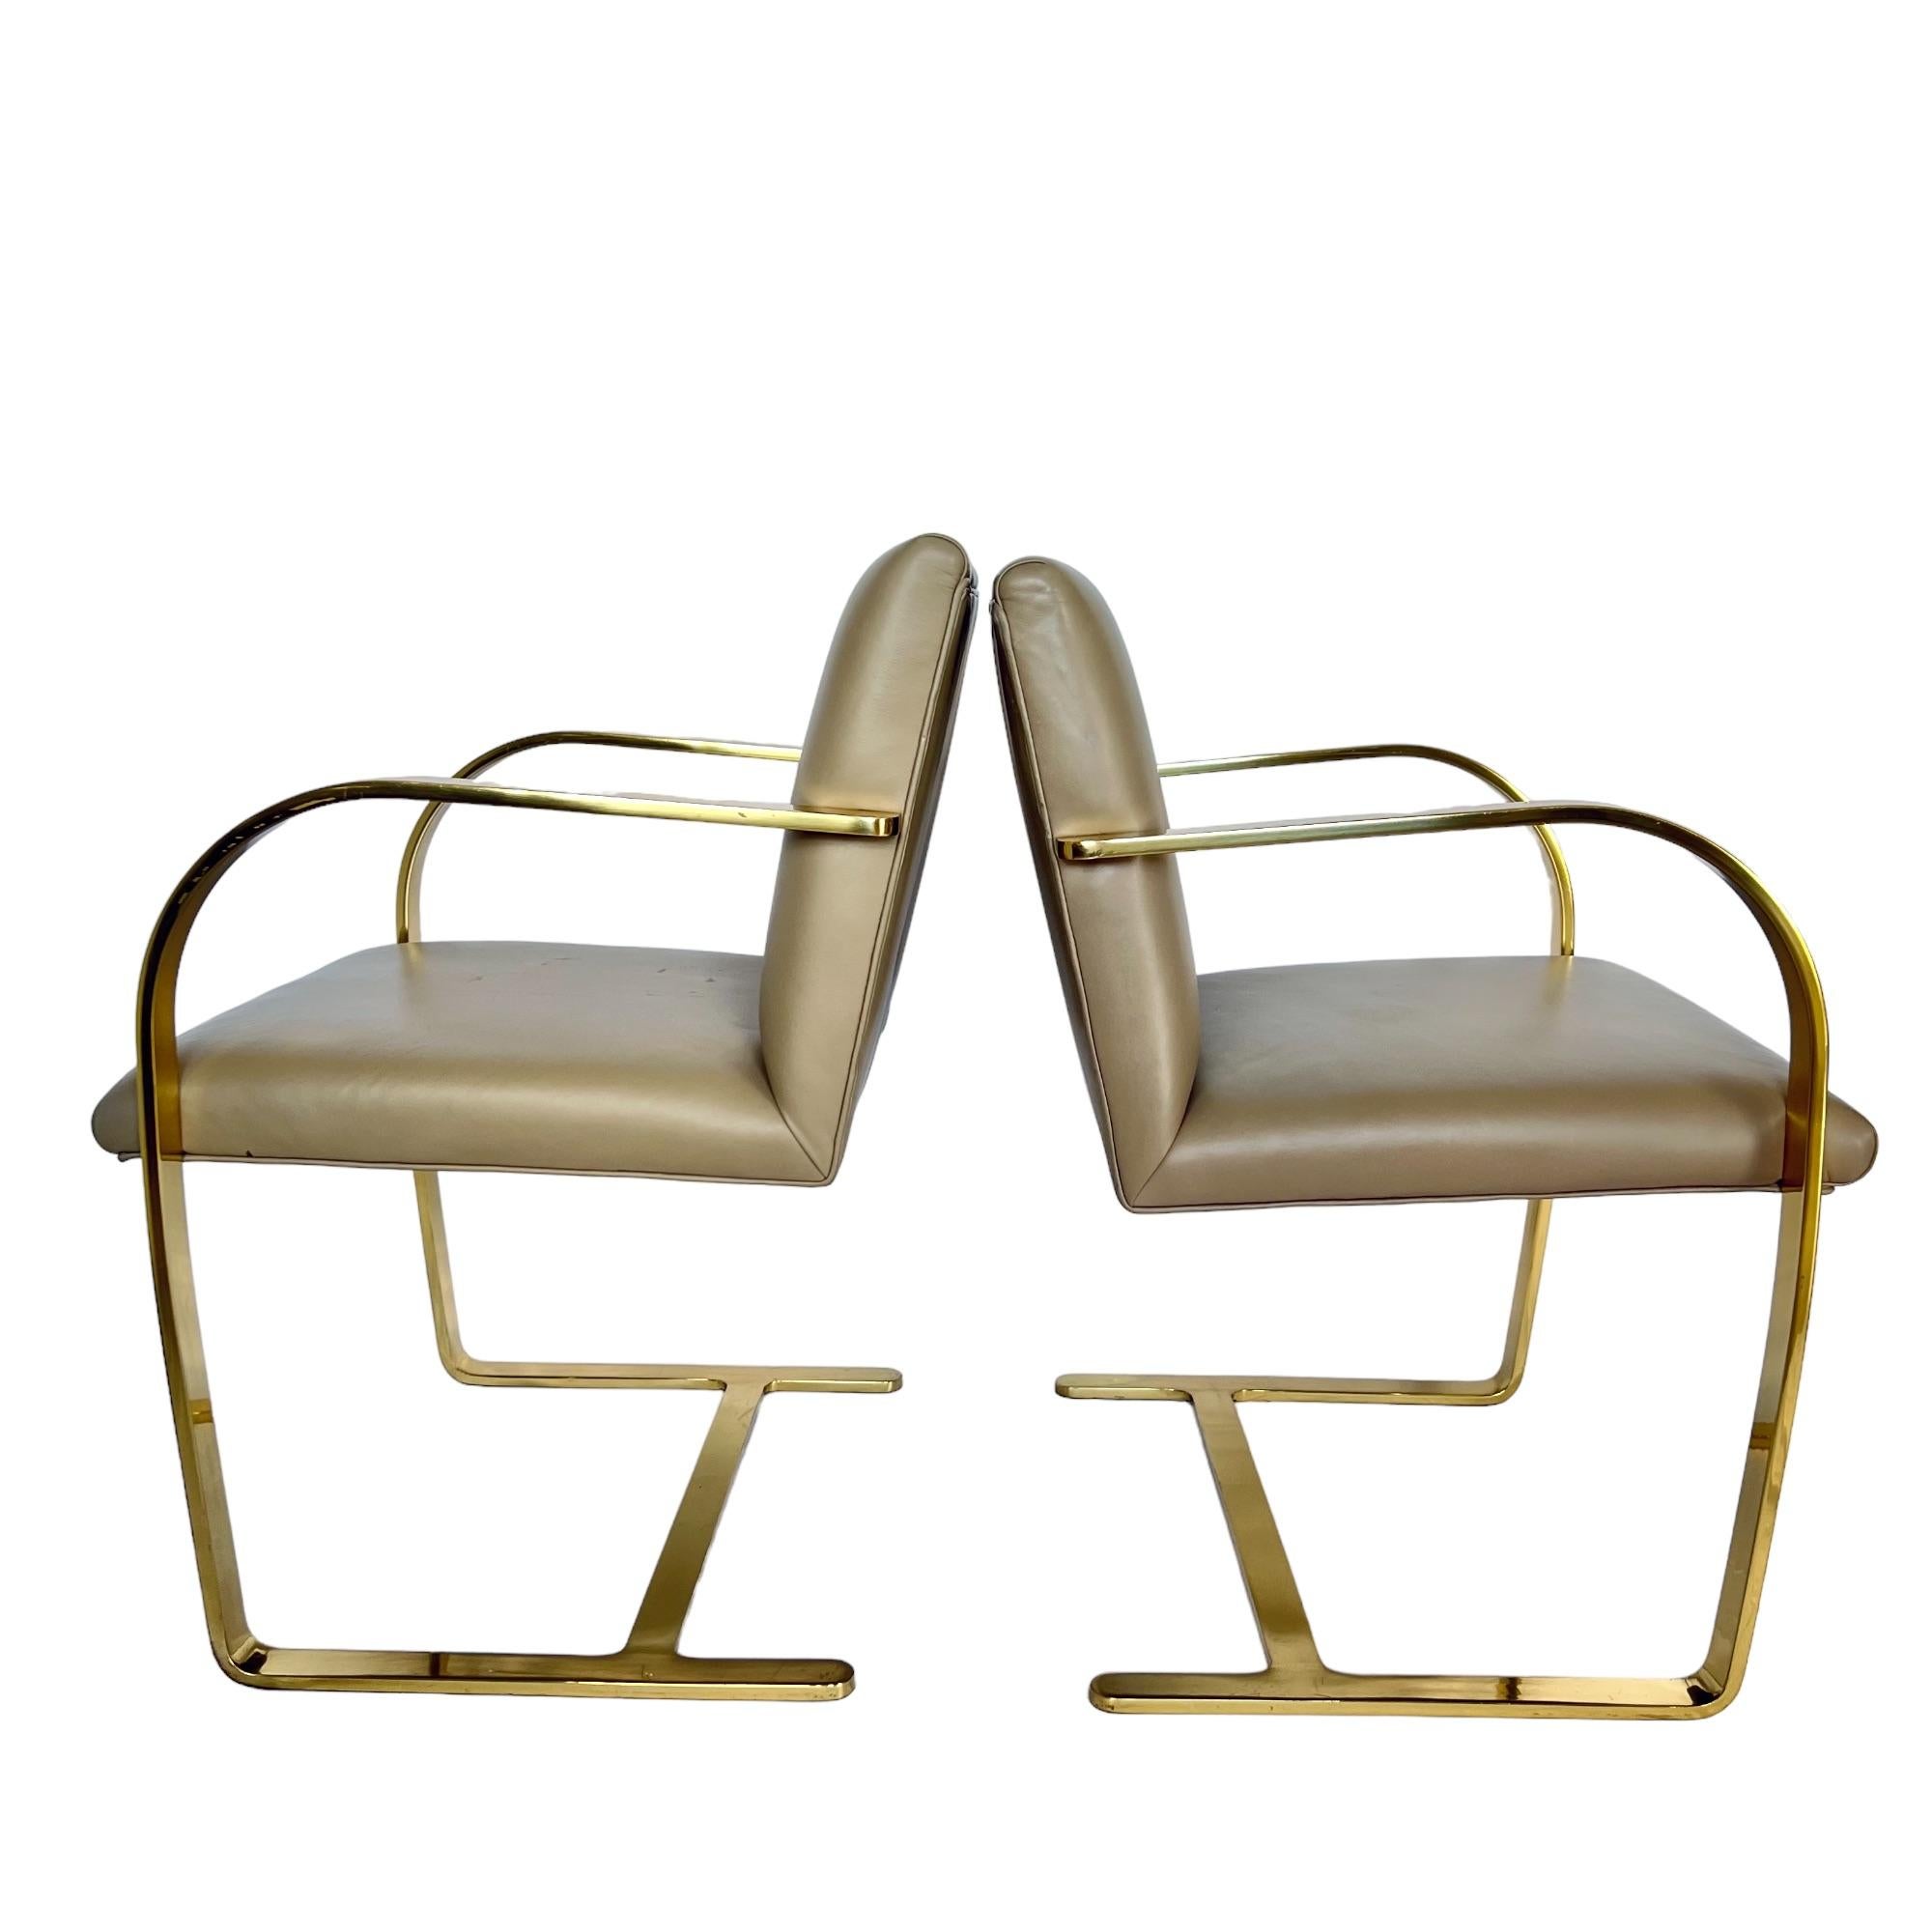 American Mies Van Der Rohe Brno Gold Brass Flat Bar Leather Chairs, a Pair For Sale